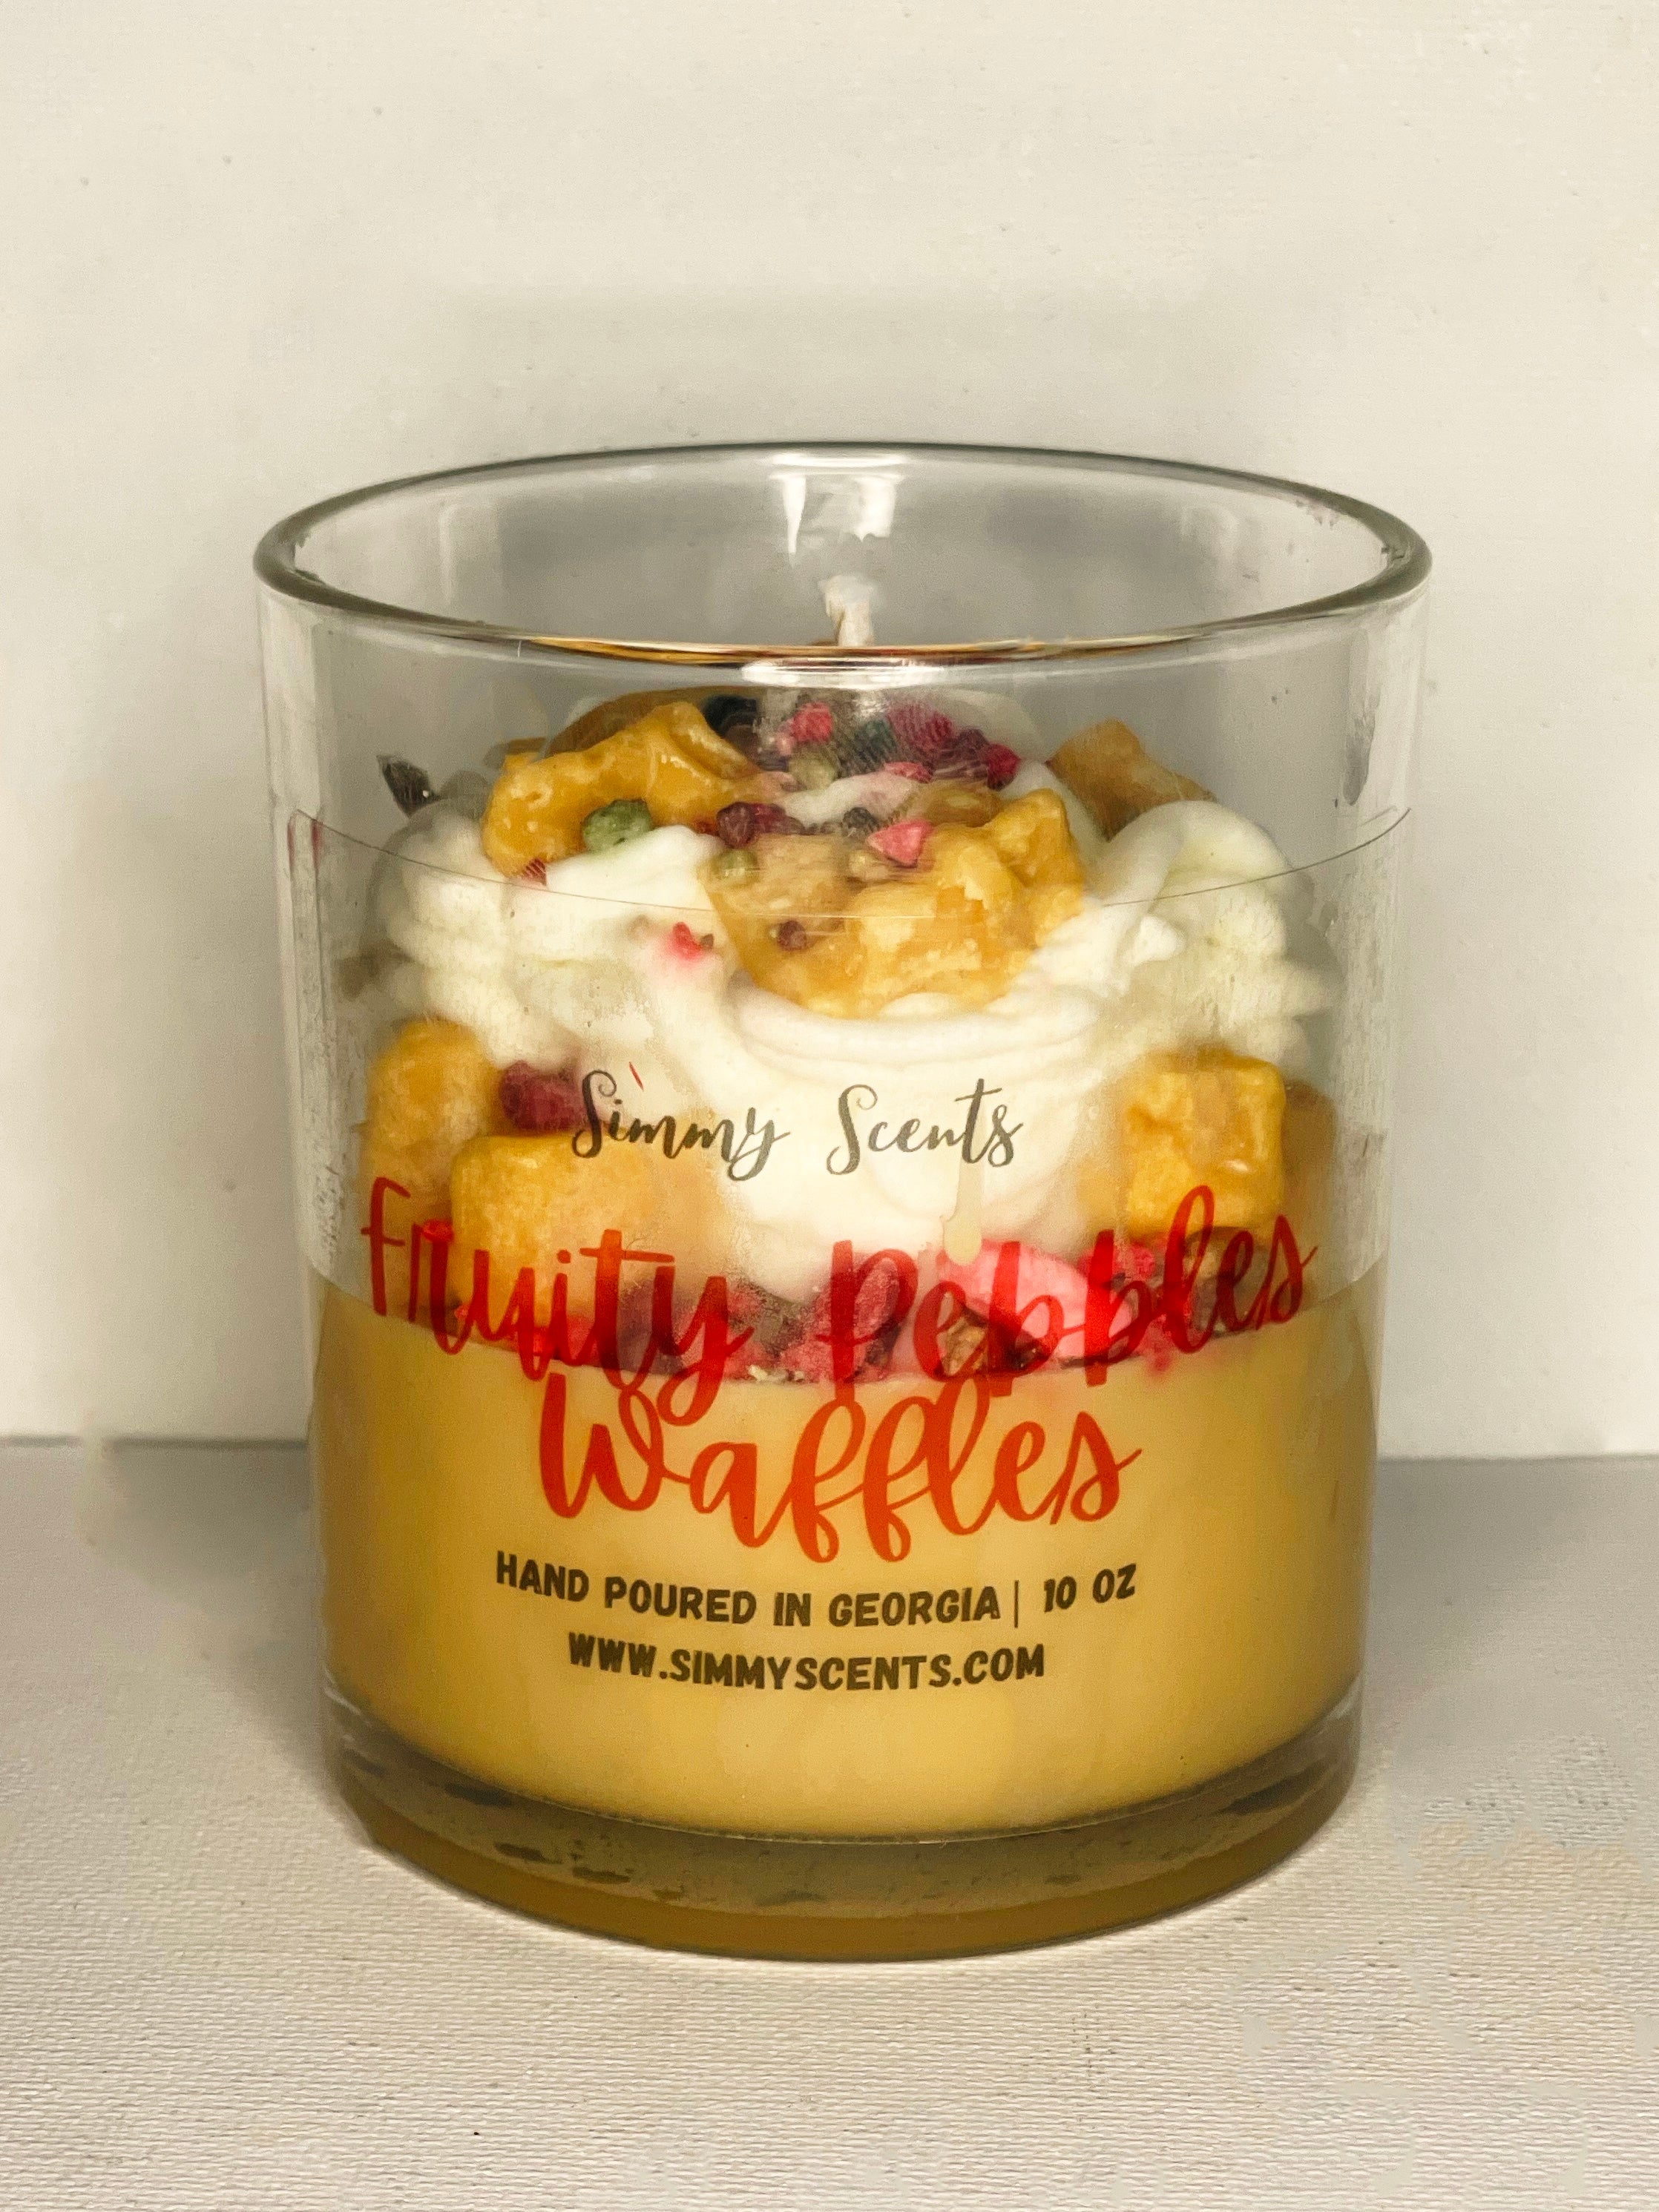 Fruity Pebbles Waffles Candle